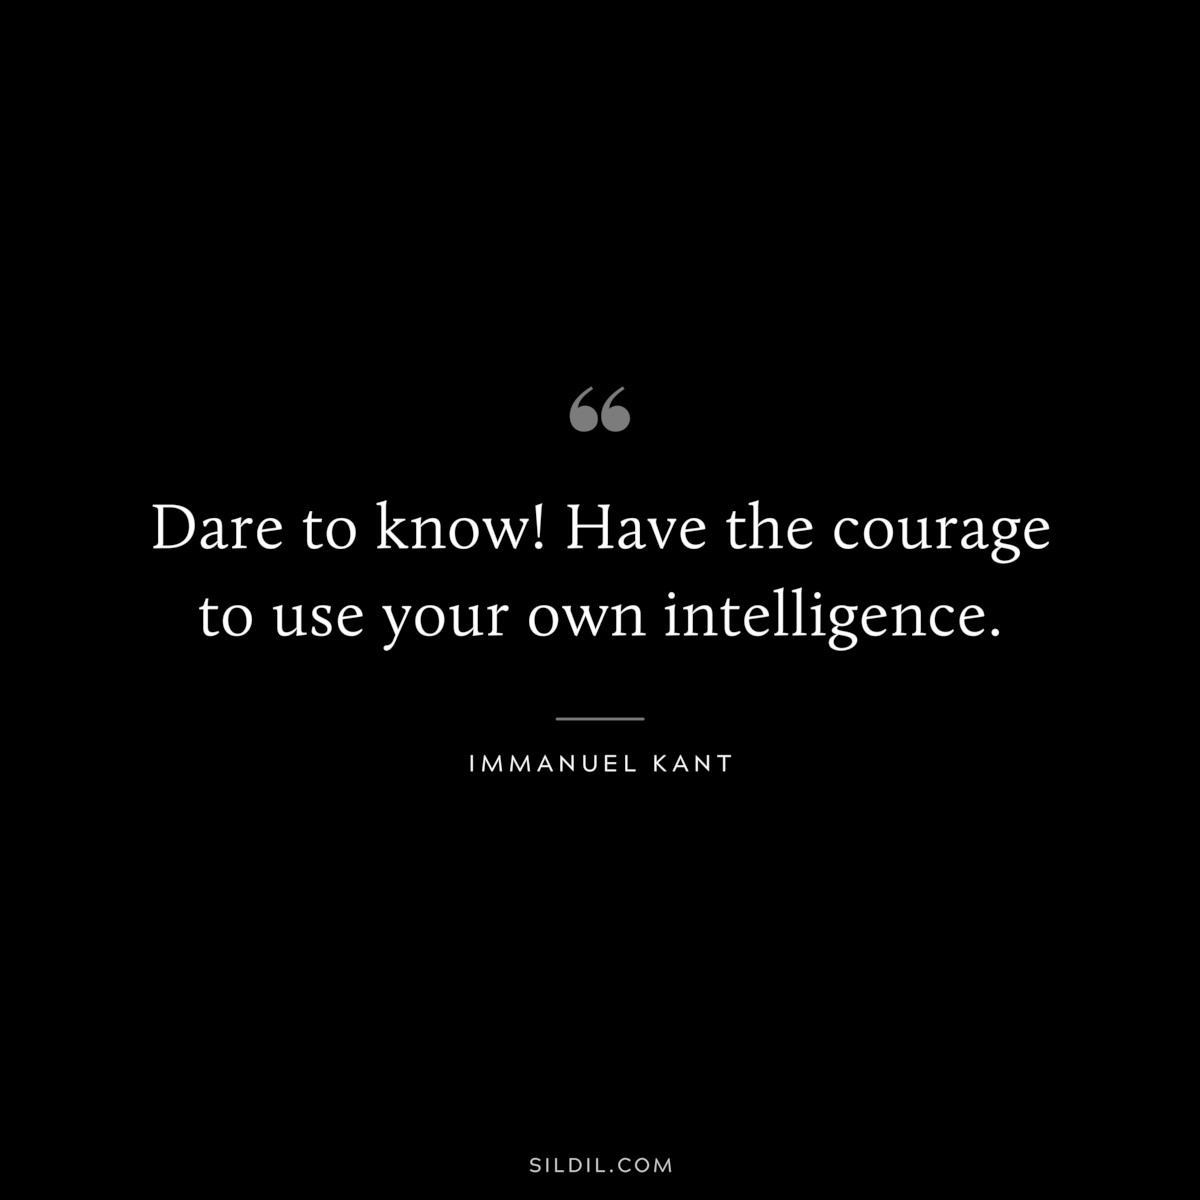 Dare to know! Have the courage to use your own intelligence. ― Immanuel Kant